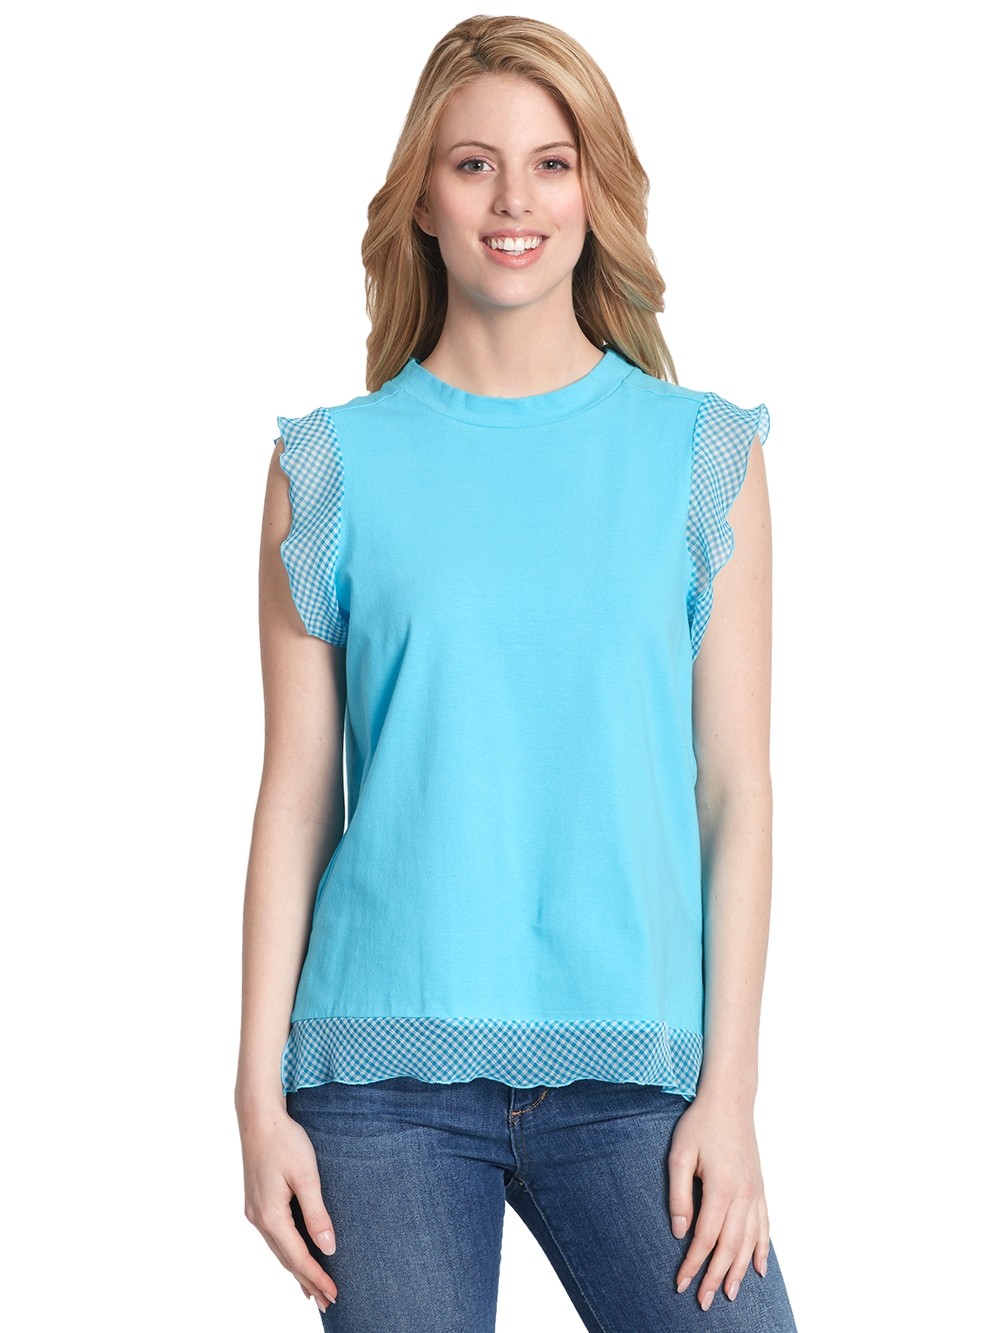 Haley - A Luxurious Casual Yet Softly Romantic Soft Knit Bodied Tank ...